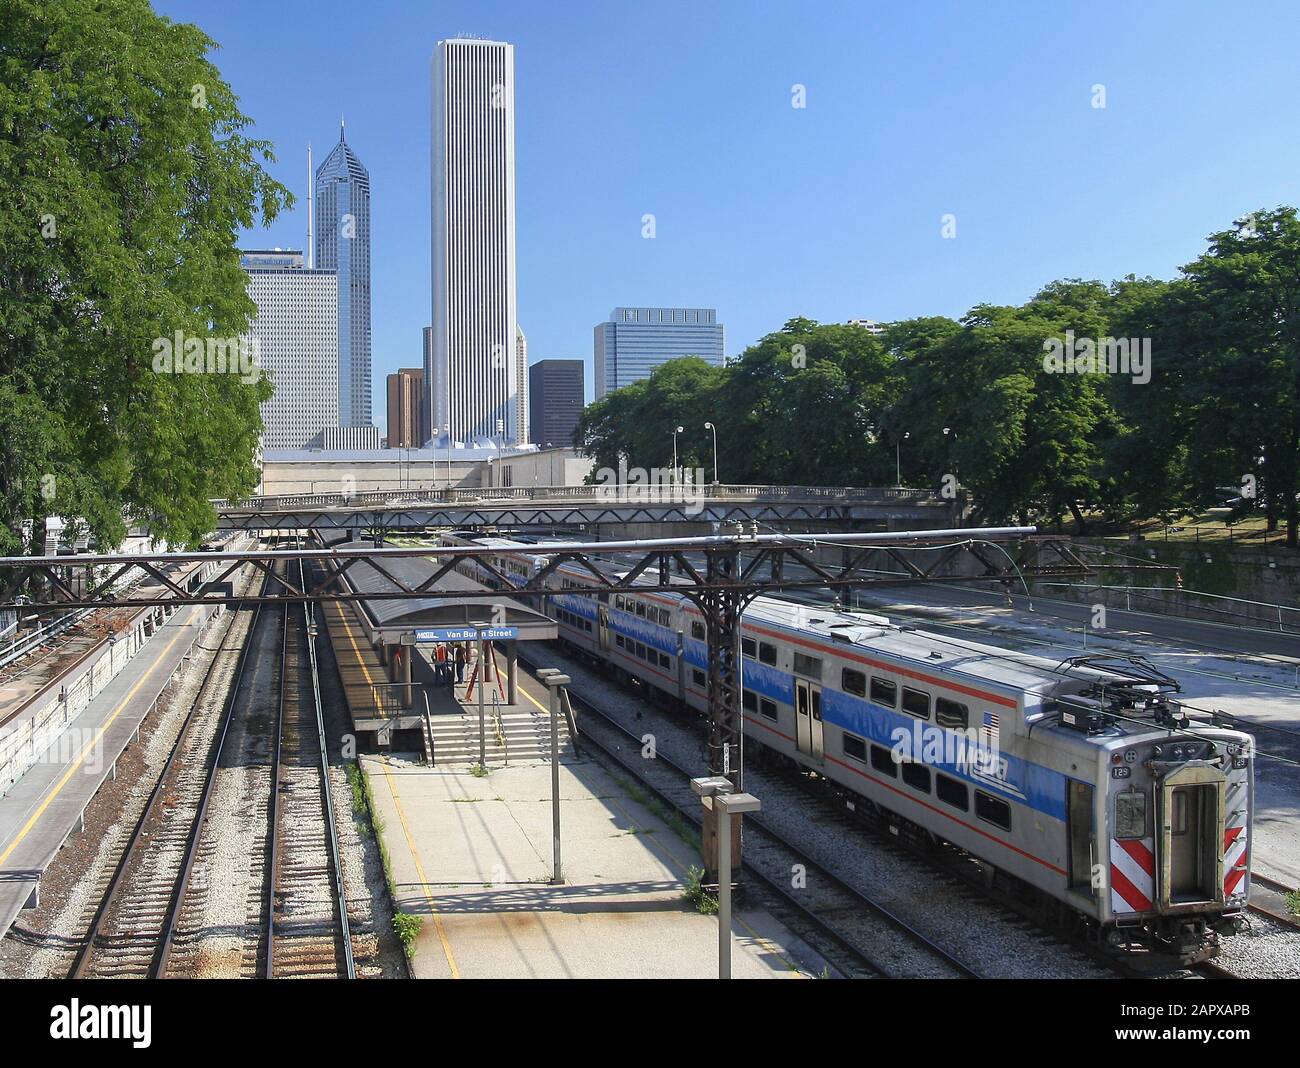 Station Van High Resolution Stock Photography and Images - Alamy